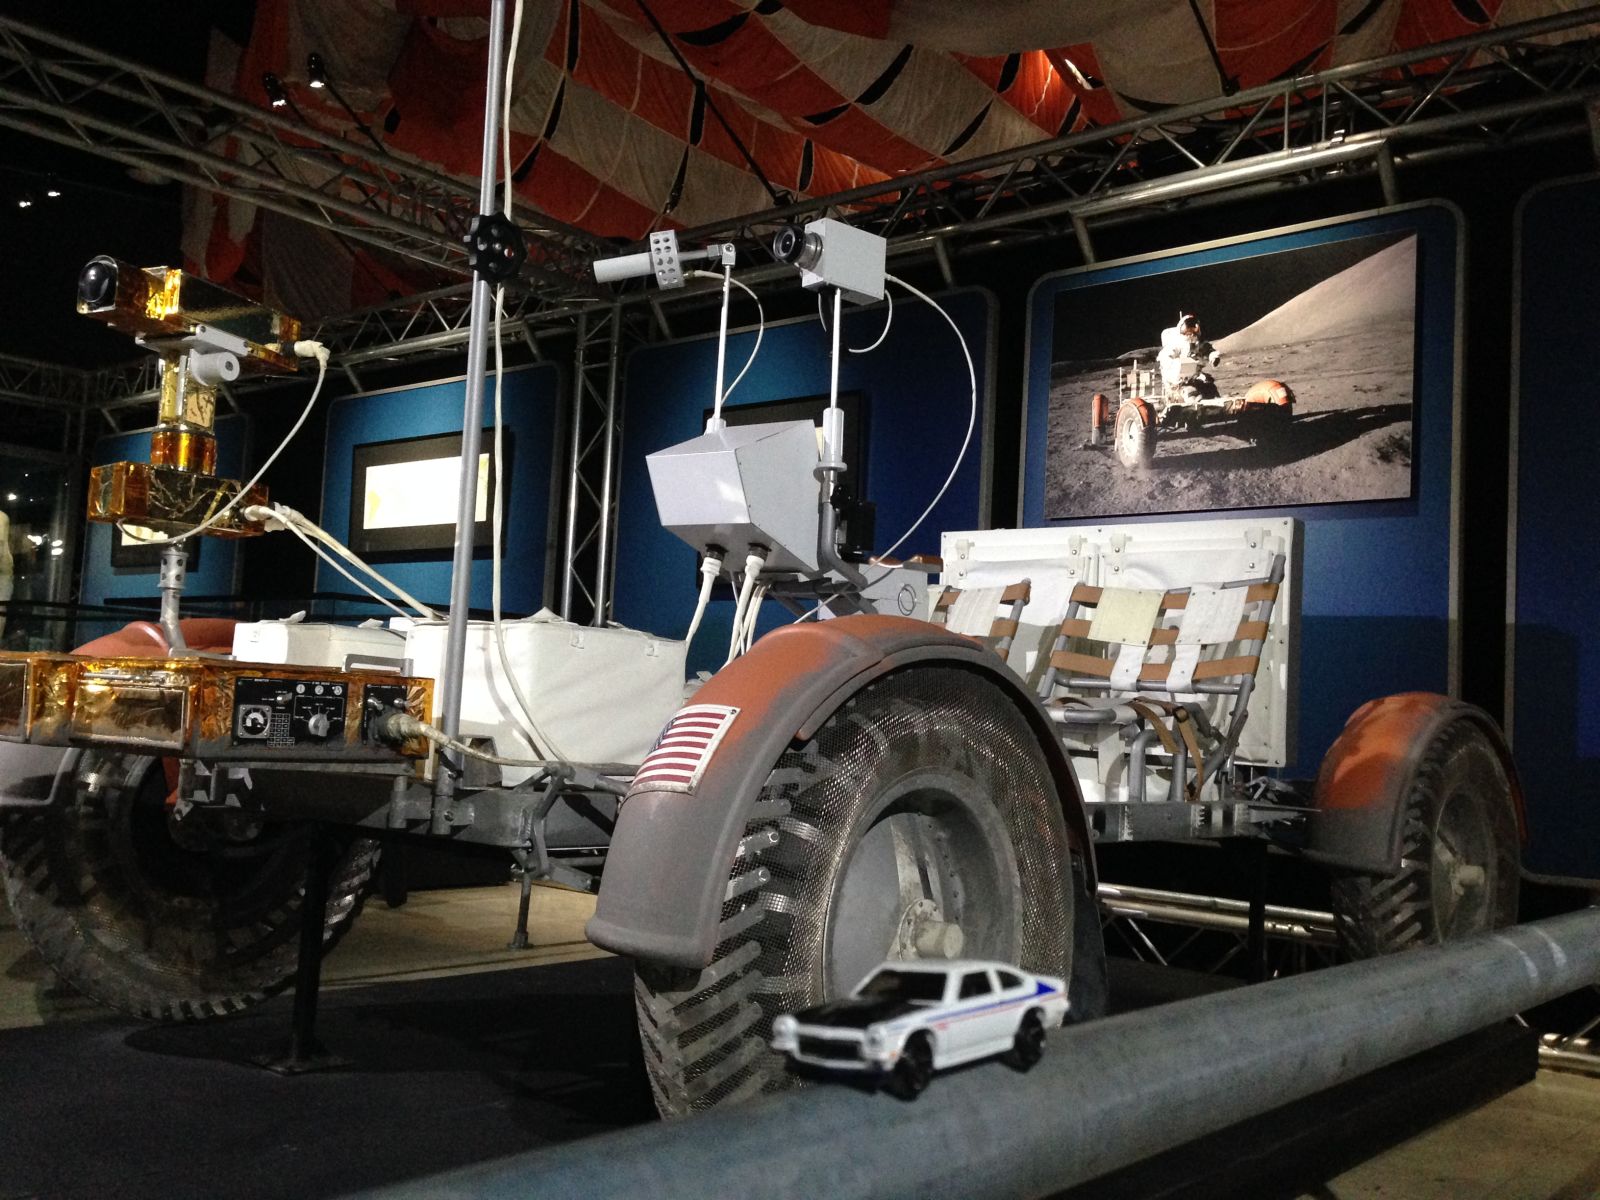 The replica of the lunar rover, my favorite piece from the exhibit